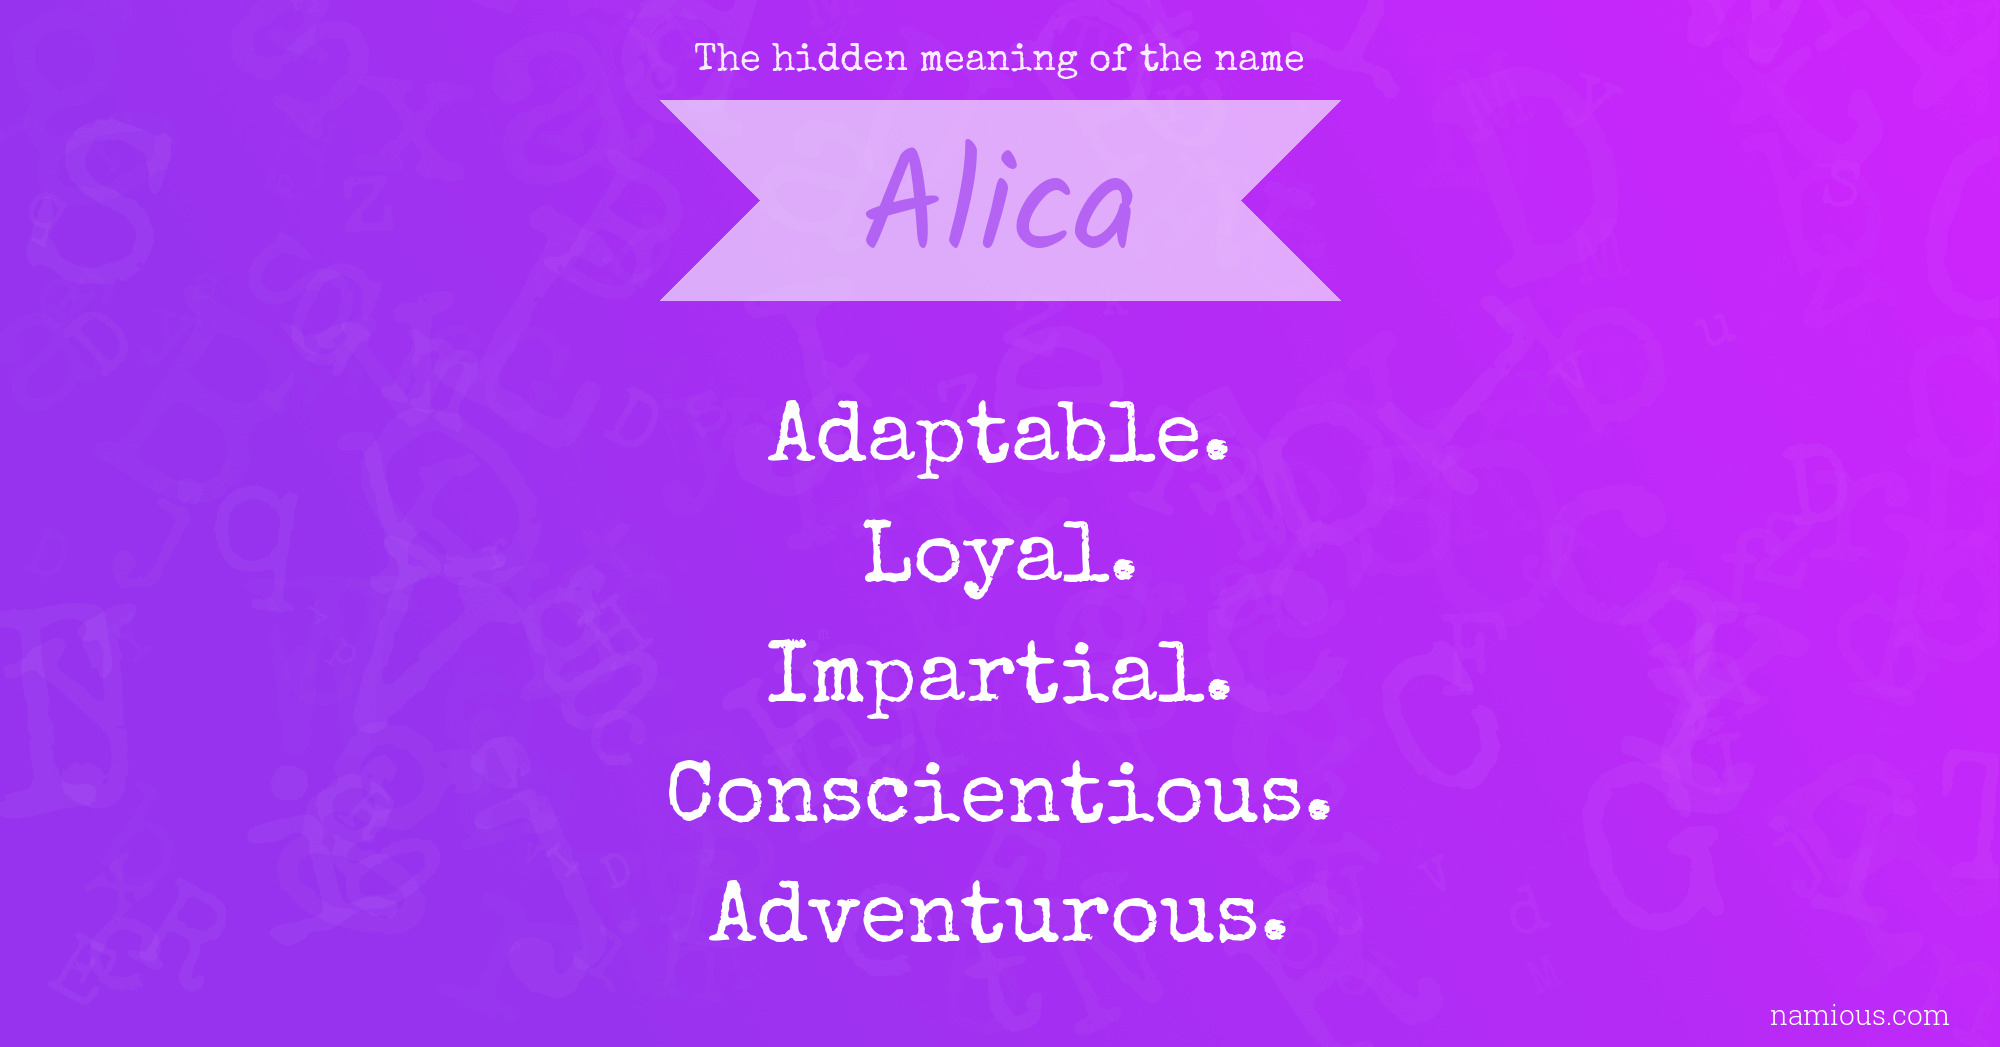 The hidden meaning of the name Alica